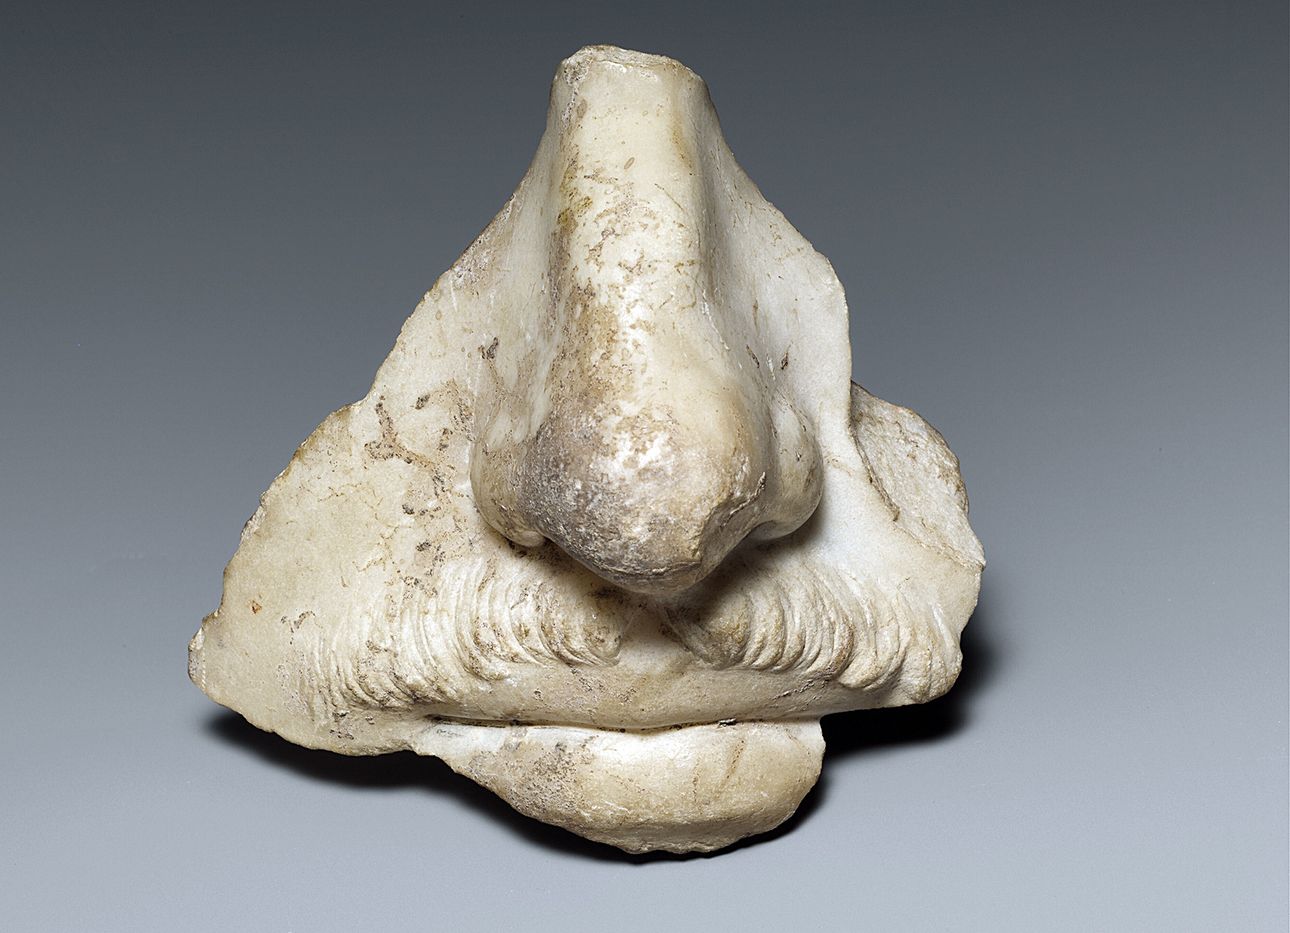 The nose fragment of a stone sculpture.